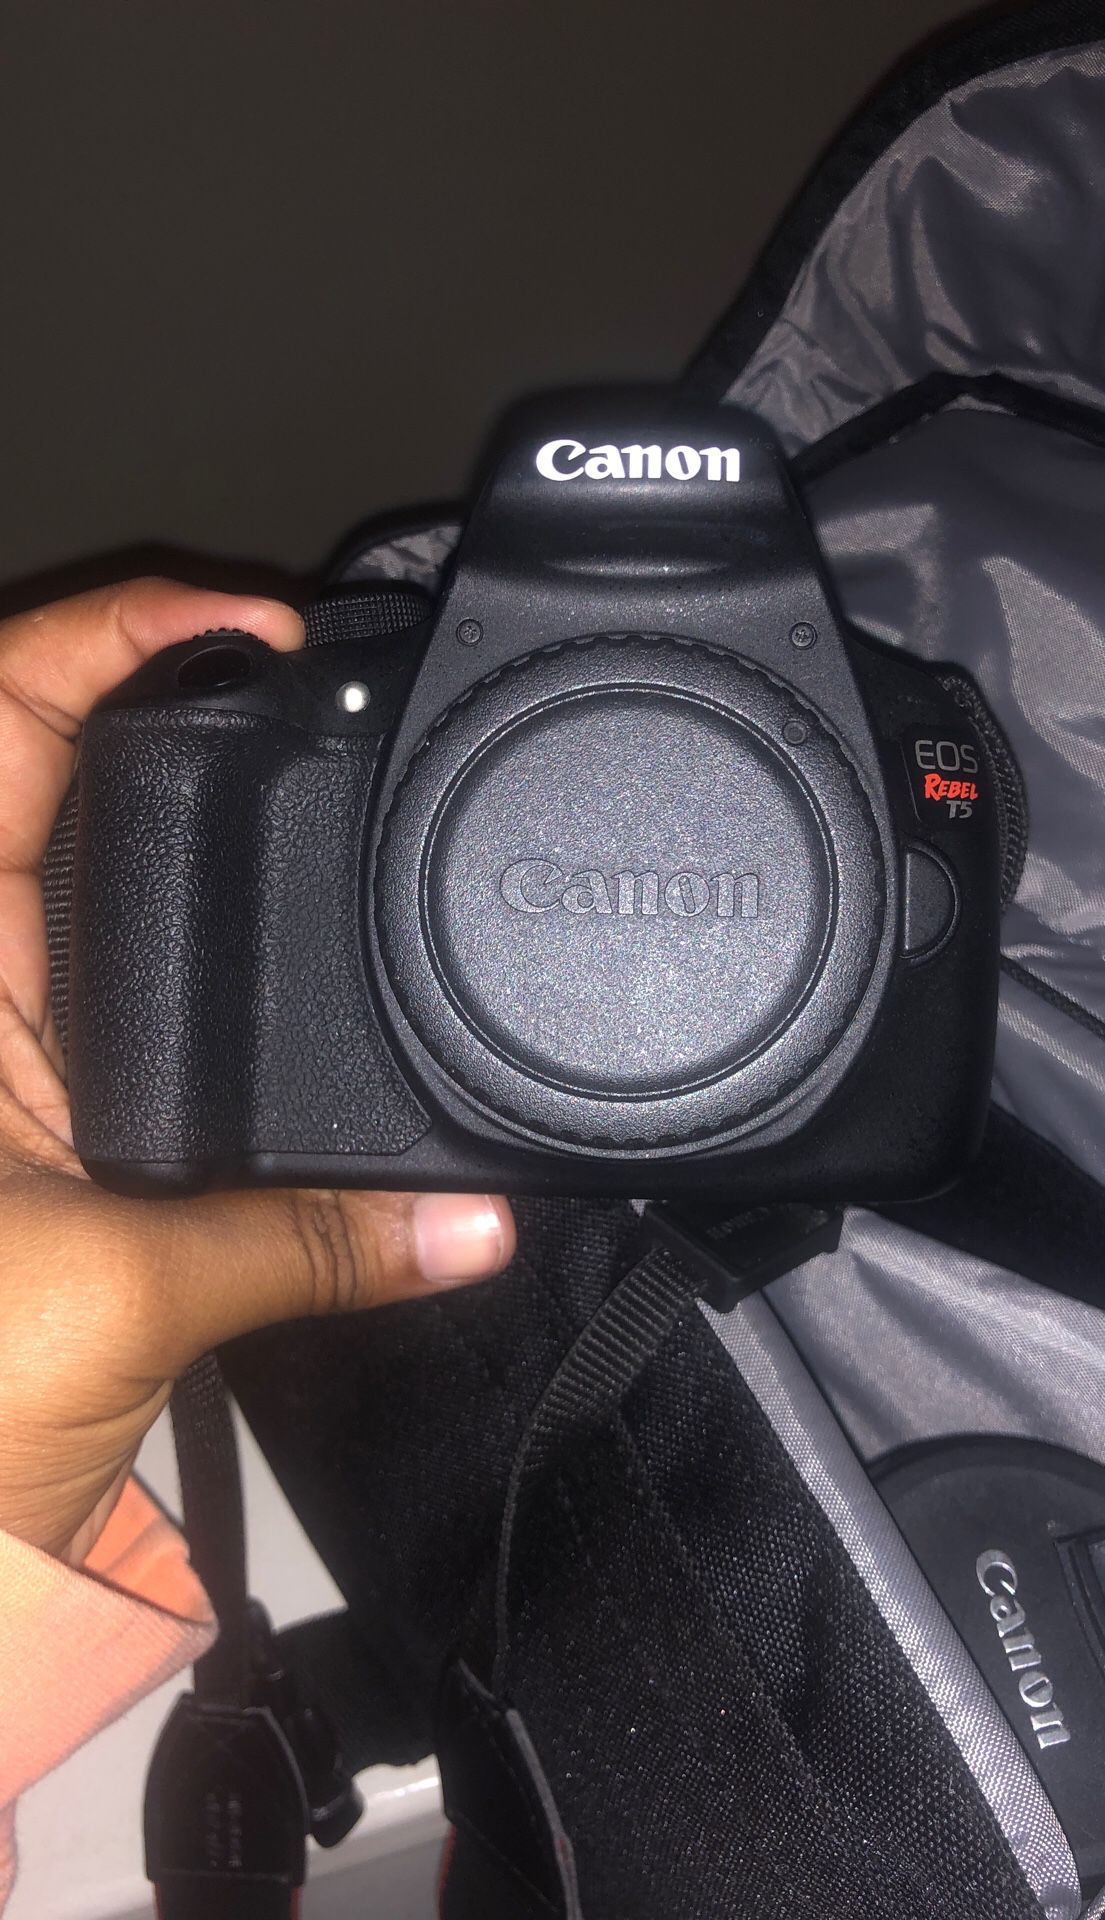 Canon rebel t5 like new w/waterproof case and camera bag